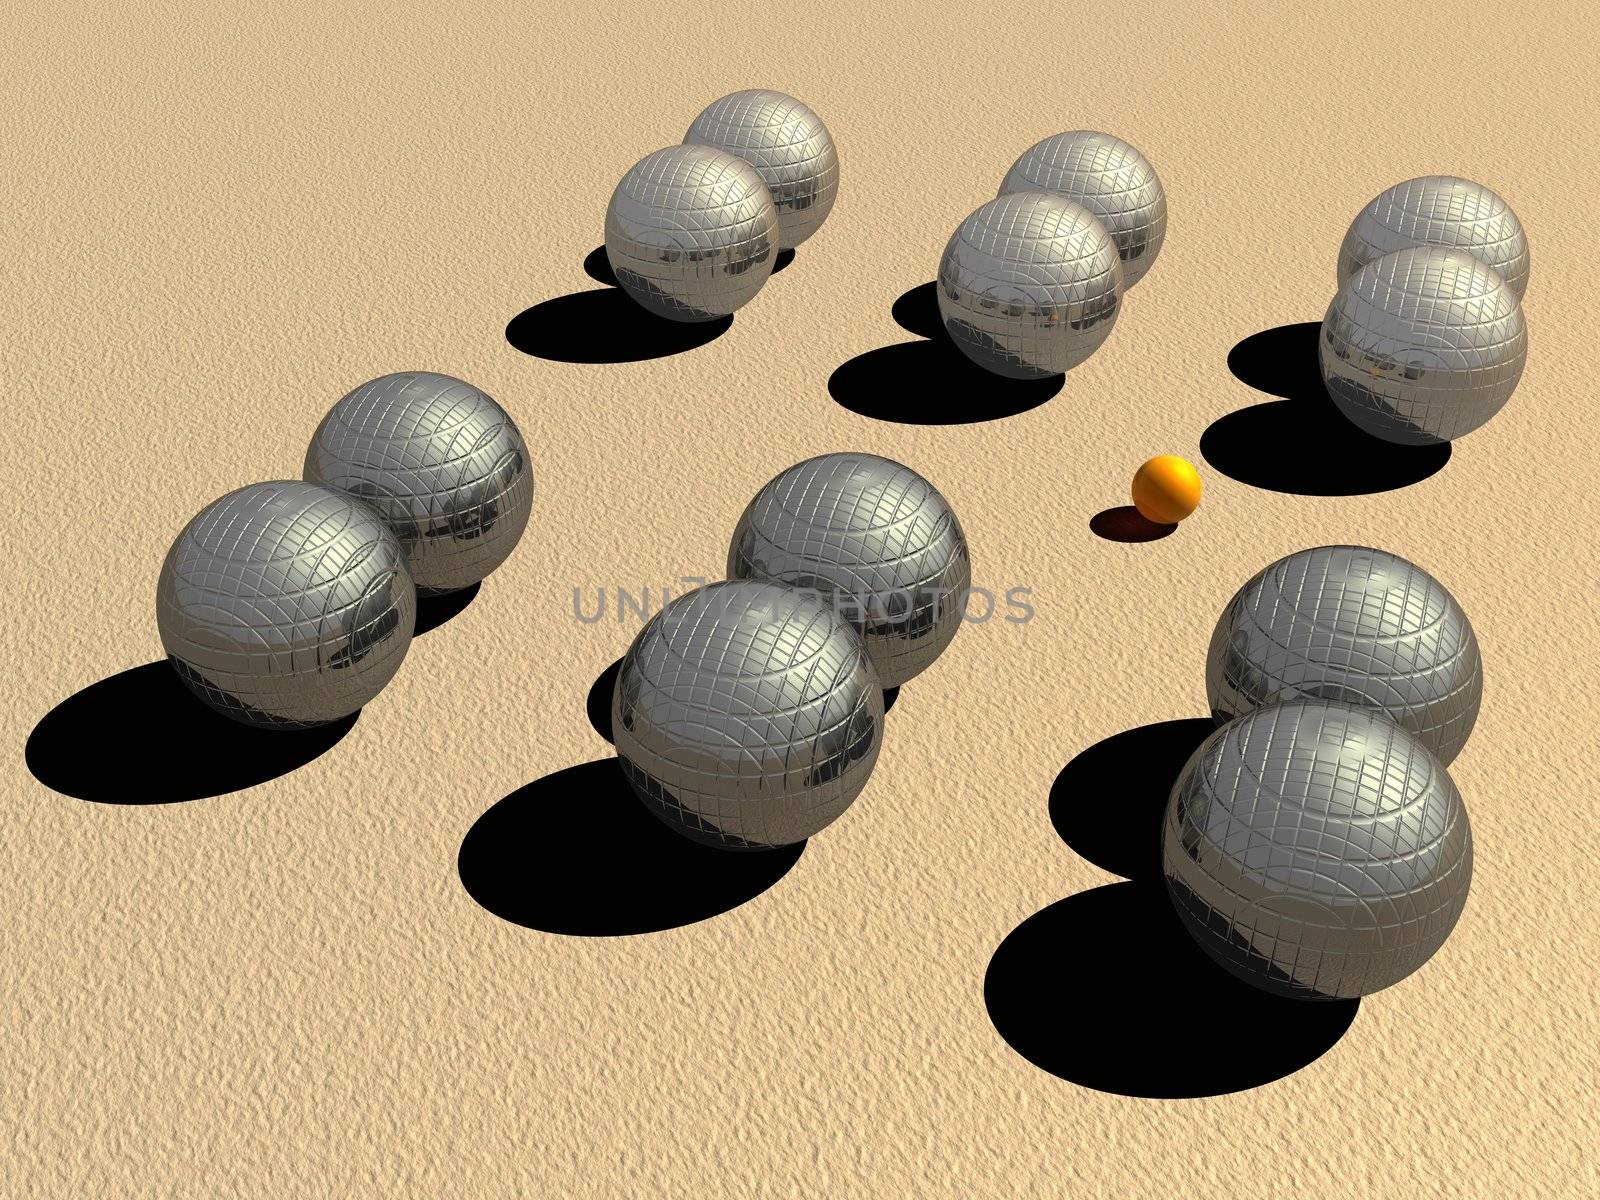 Two teams of big metallic petanque balls and a small orange jack on the sand